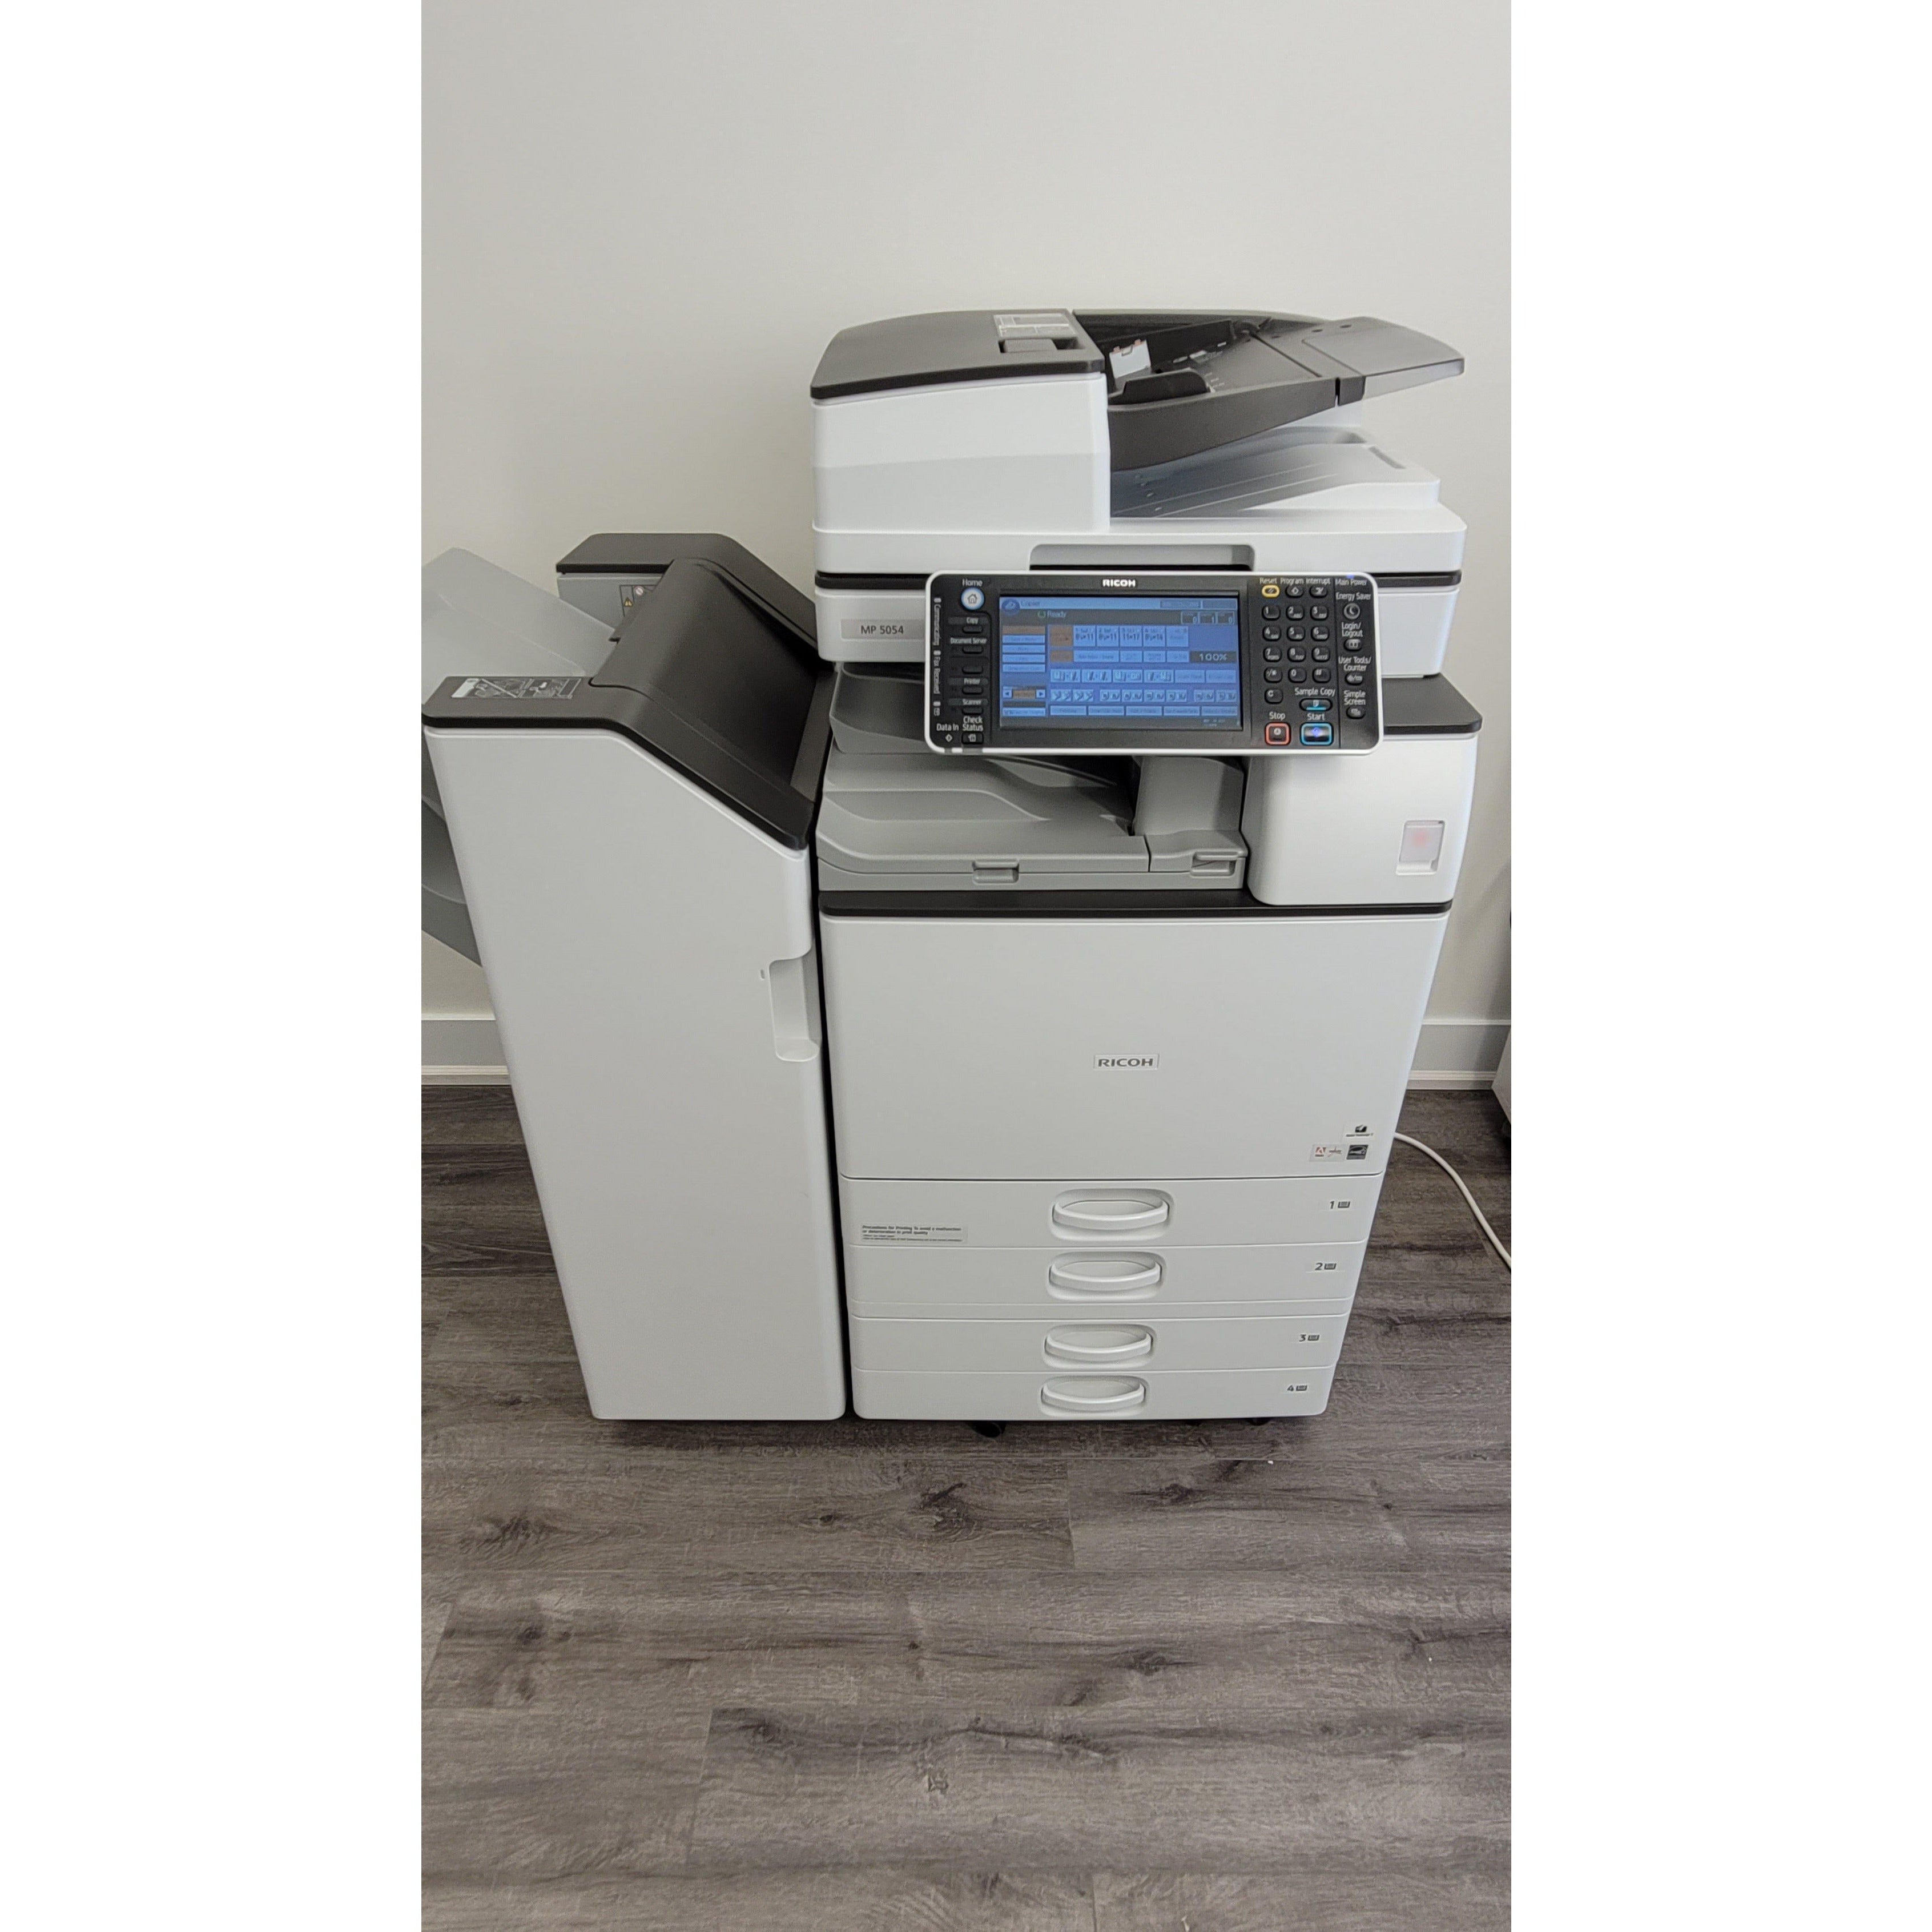 REPOSSESSED Ricoh MP 5054 B/W Copier Like New ONLY 13,200 Prints